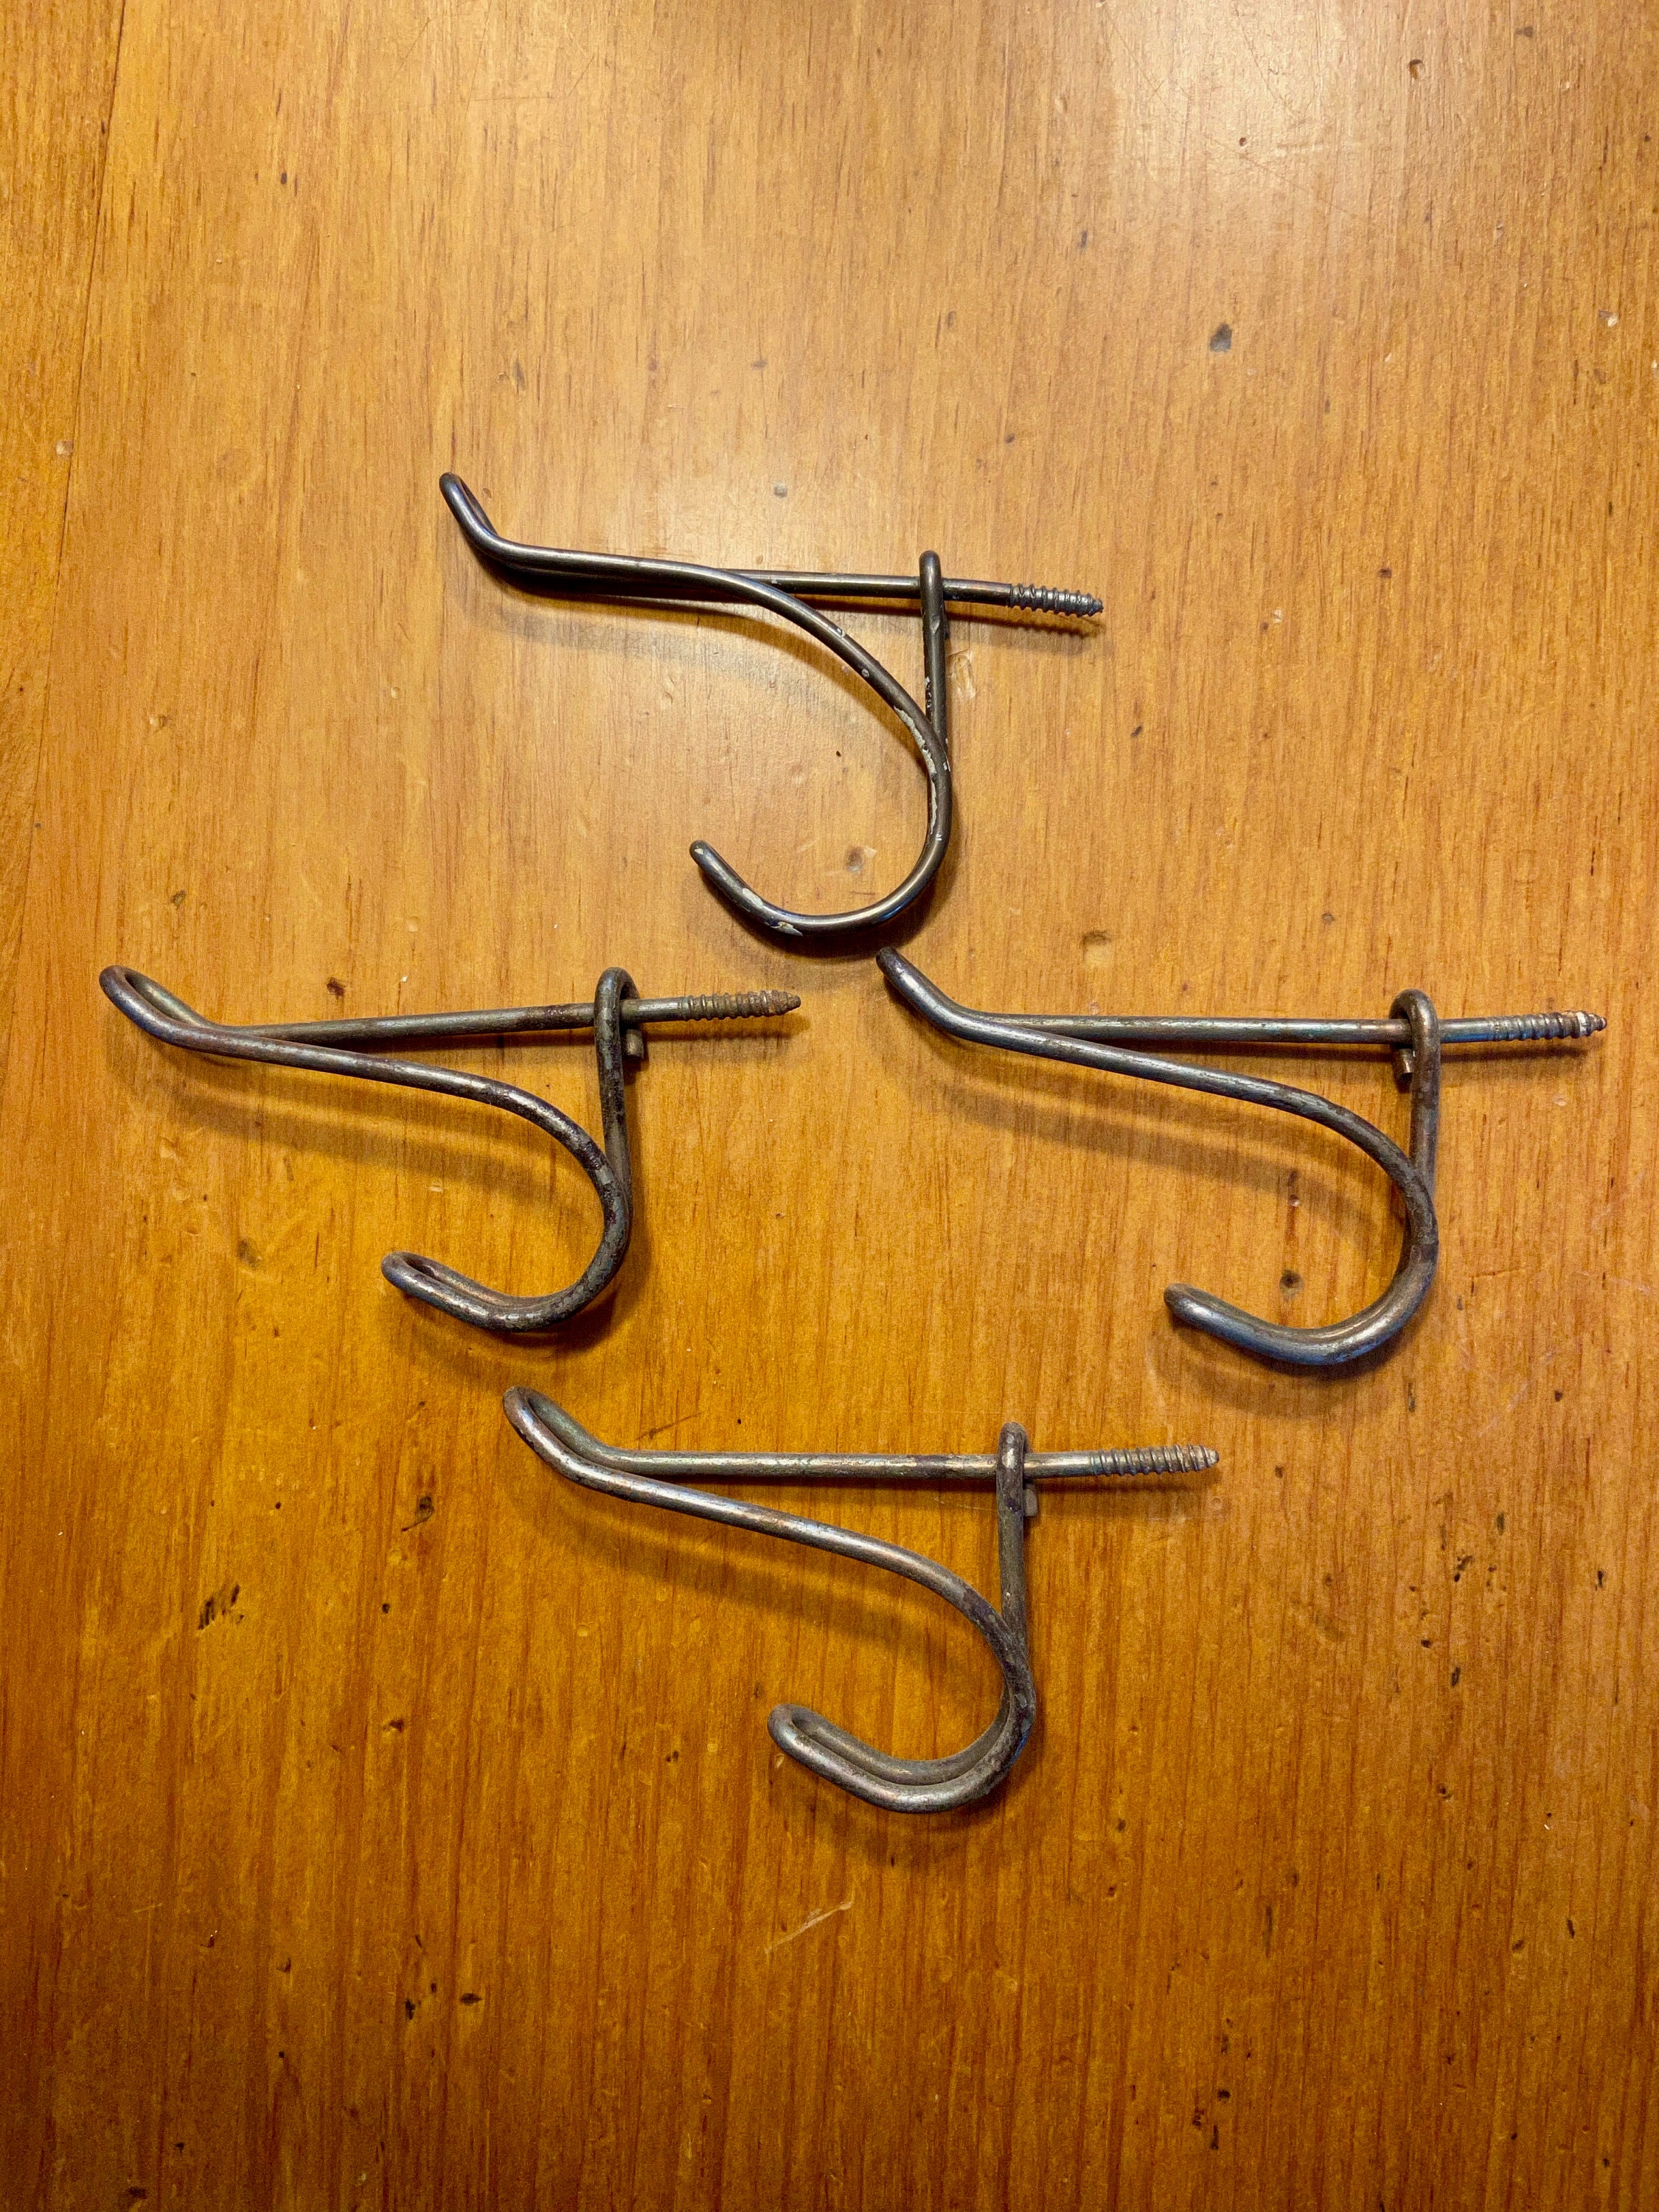 Vintage Wire Coat Hooks - Set of 4 - DIY Projects - Wall Hanging Decor